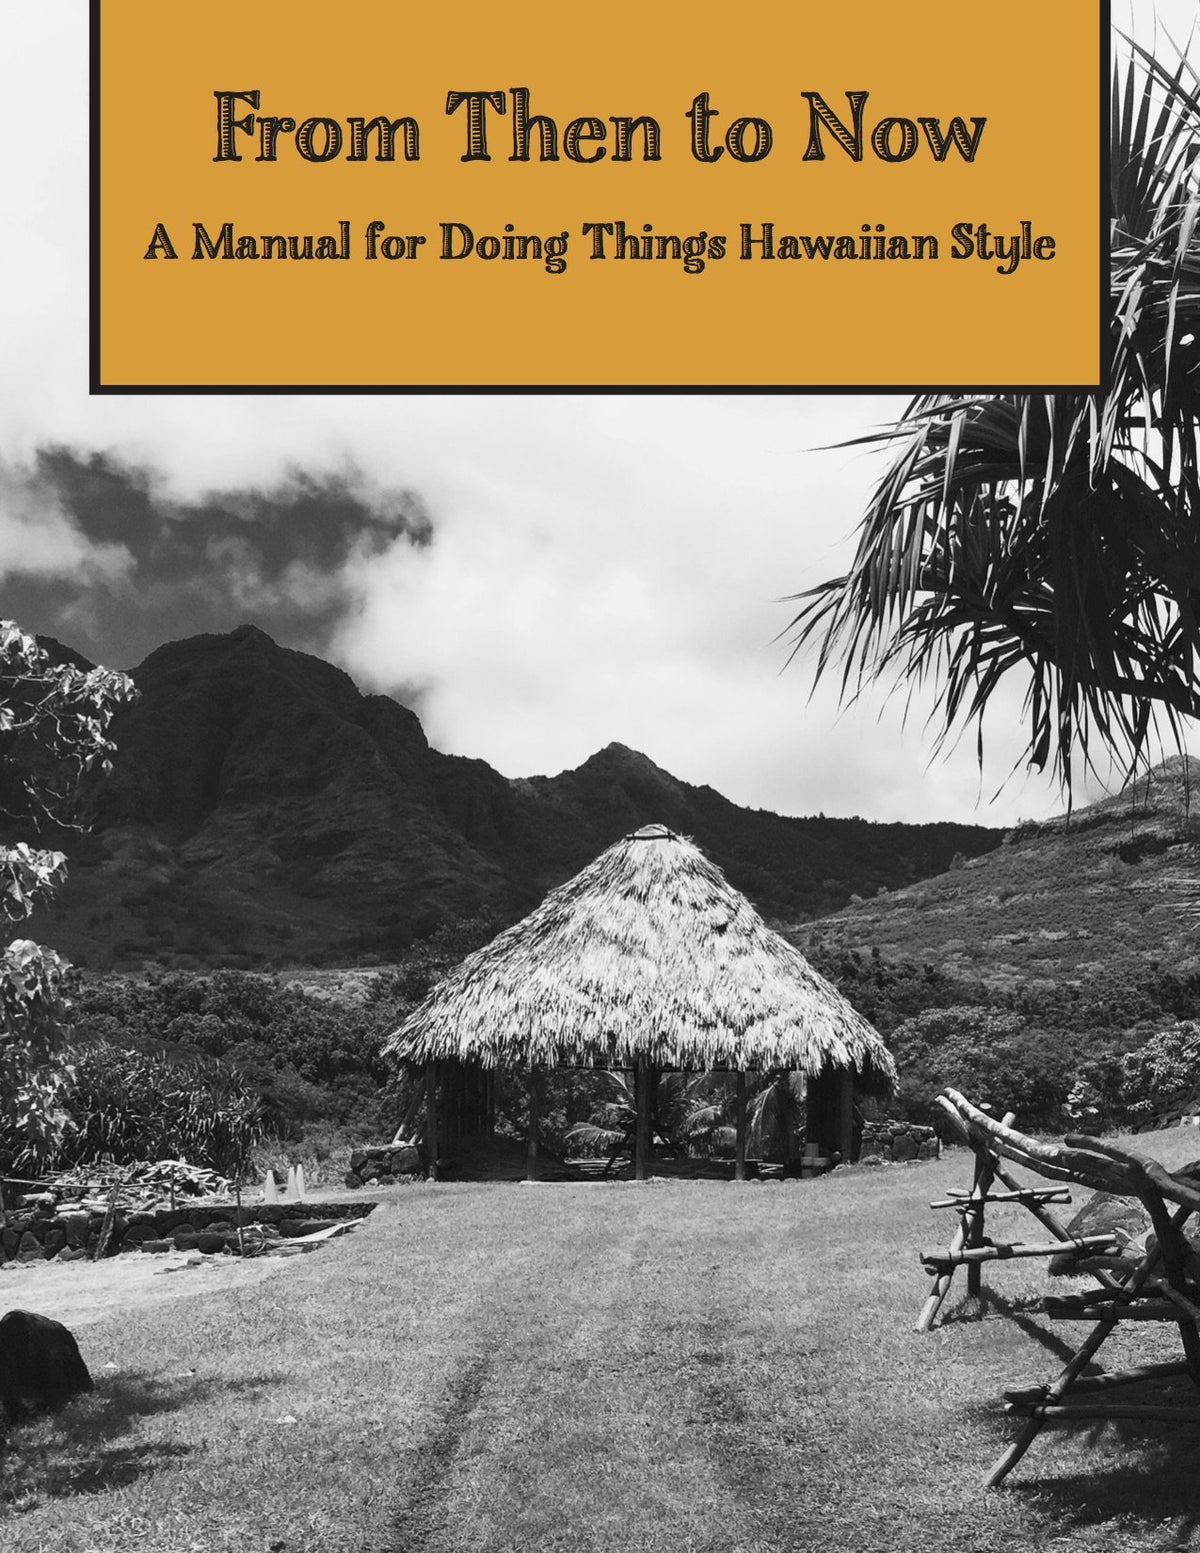 From Then to Now: A Manual for Doing Things Hawaiian Style